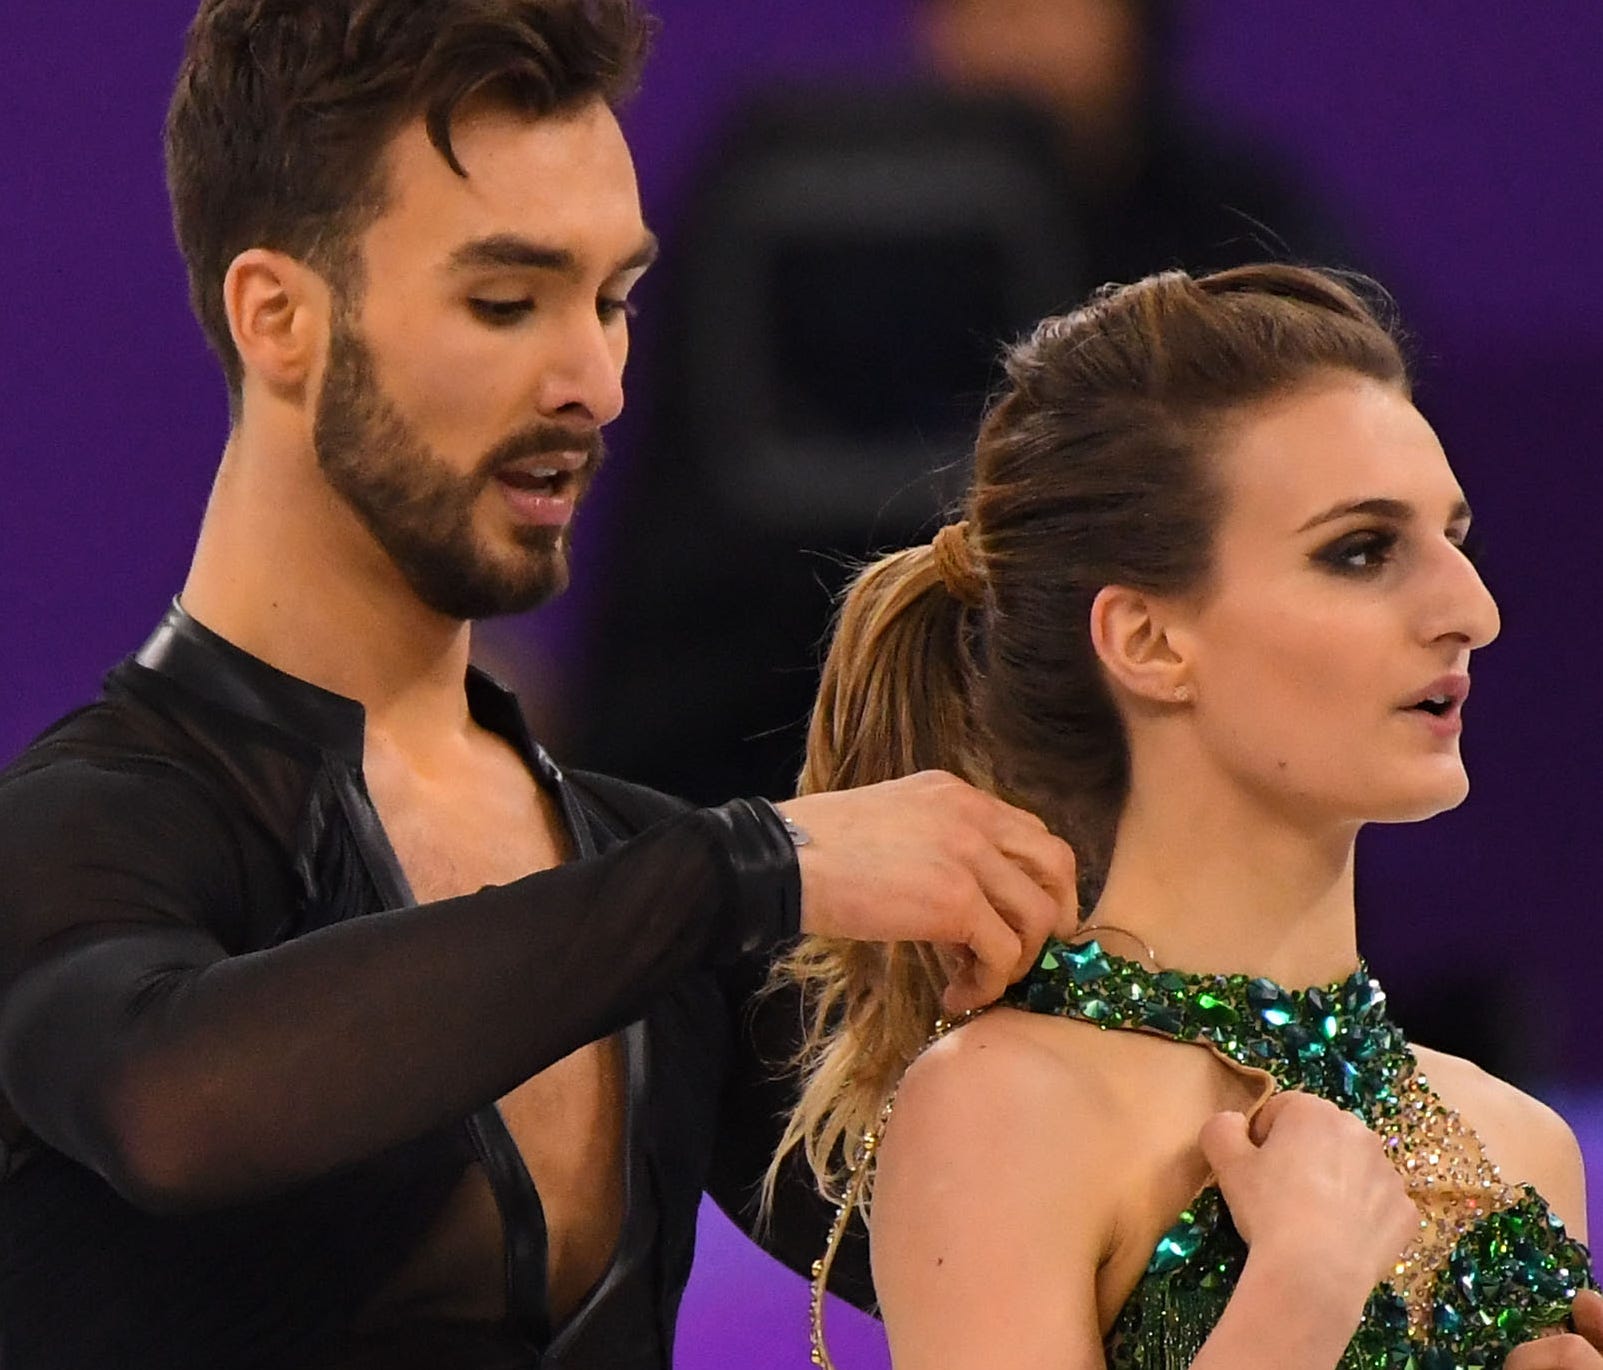 Gabriella Papadakis experiences a wardrobe malfunction as she and Guillaume Cizeron of France dance in the short program at the Olympics on Monday.